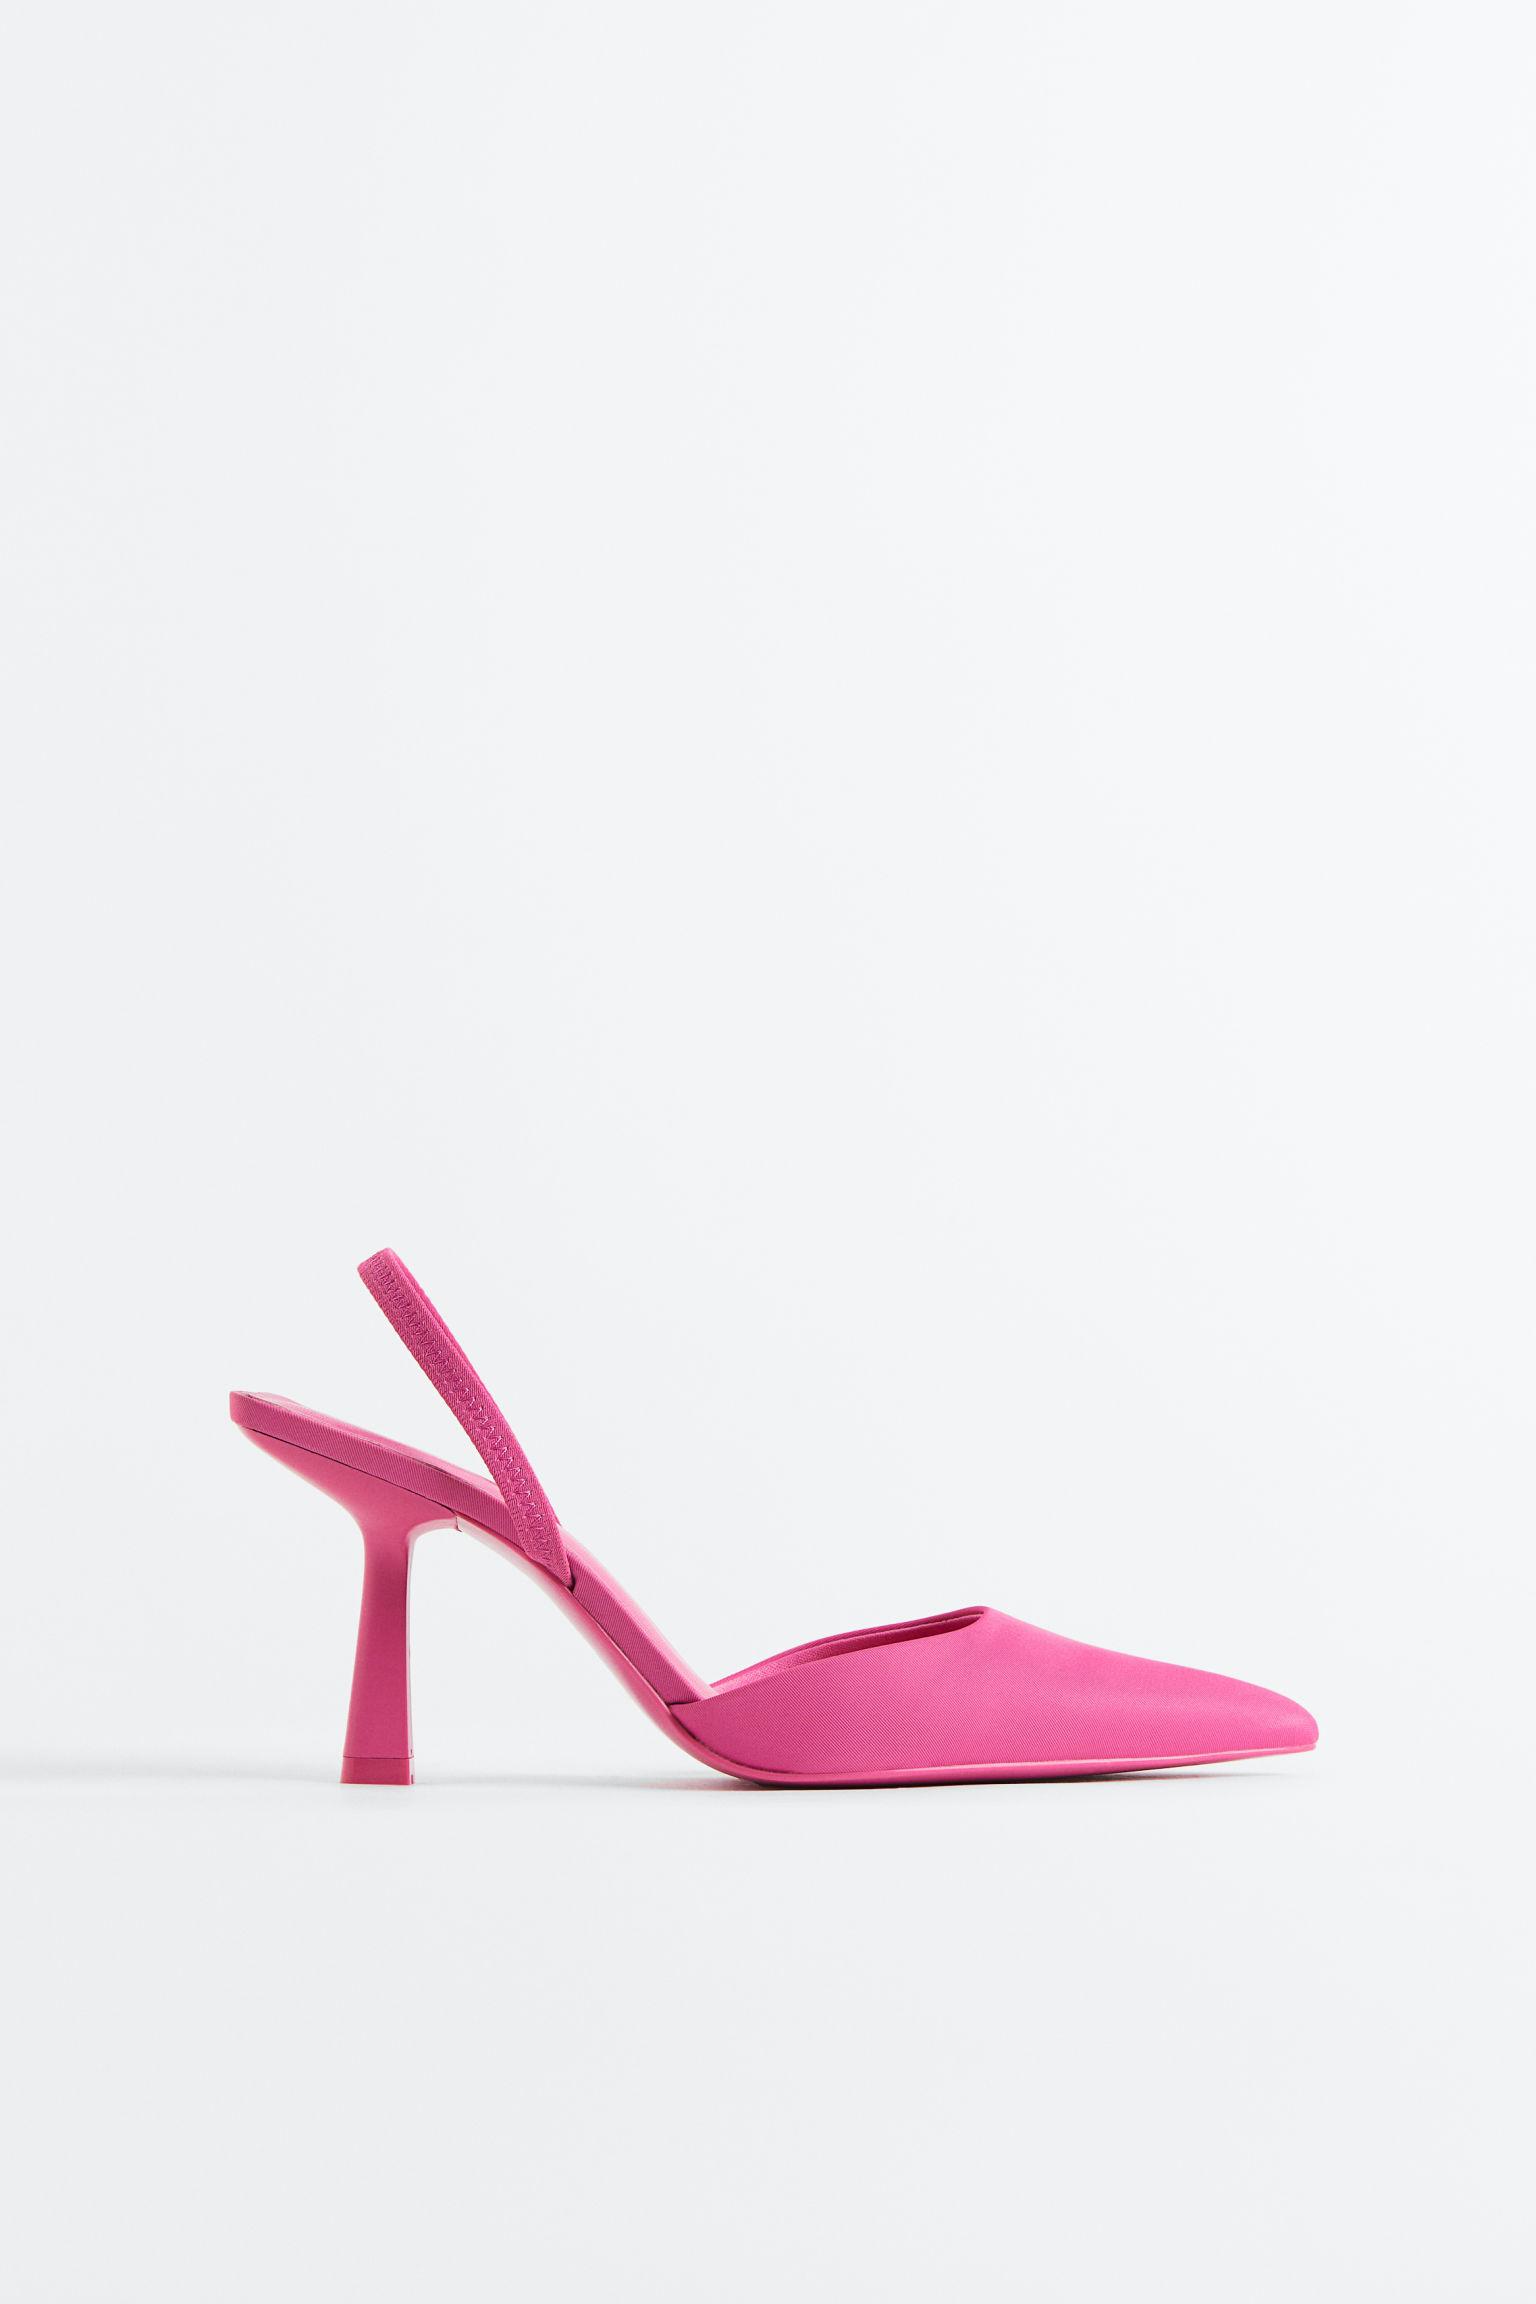 H&M Slingbacks in Pink | Lyst Canada